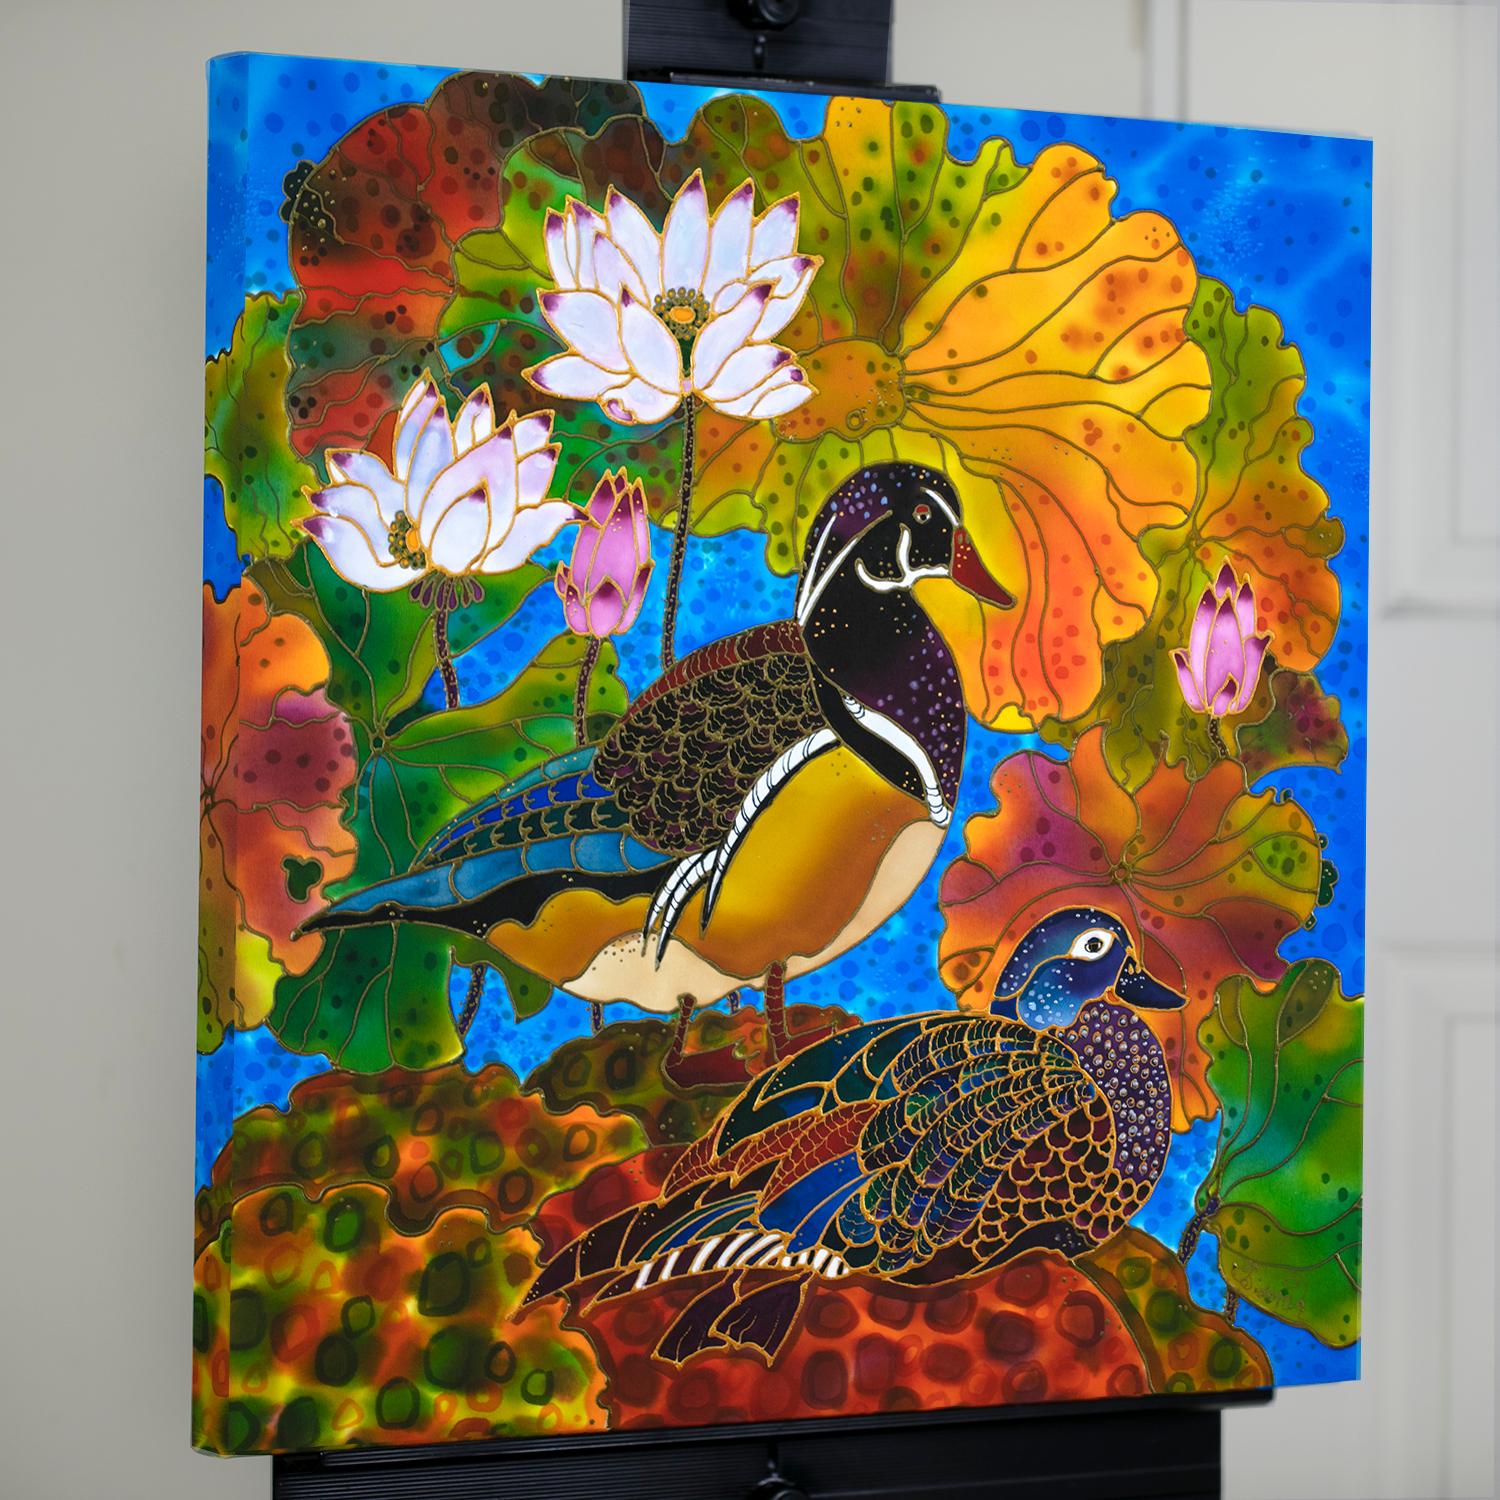 <p>Artist Comments<br>As part of artist Yelena Sidorova's Birds series, this piece features a vibrant display of intricately painted ducks surrounded by colorful flowers. The artwork celebrates the distinctive qualities of silk painting, emphasizing